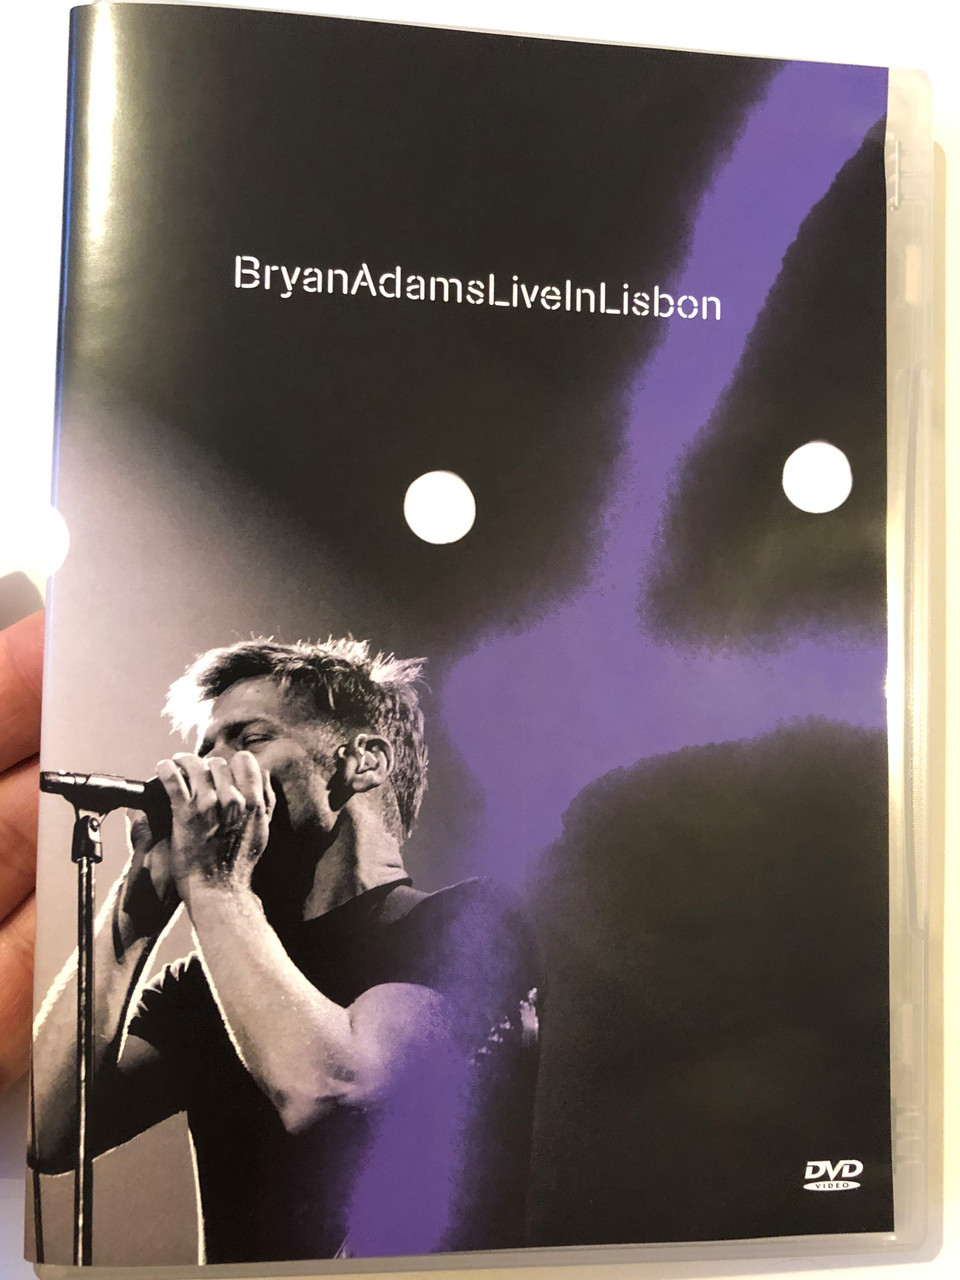 Bryan Adams DVD 2005 Live in Lisbon / Directed by Dick Carruthers / Room  Service, Open Road, Kids Wanna Rock, Run to You, All for Love / Badman Ltd  - Polydor - bibleinmylanguage